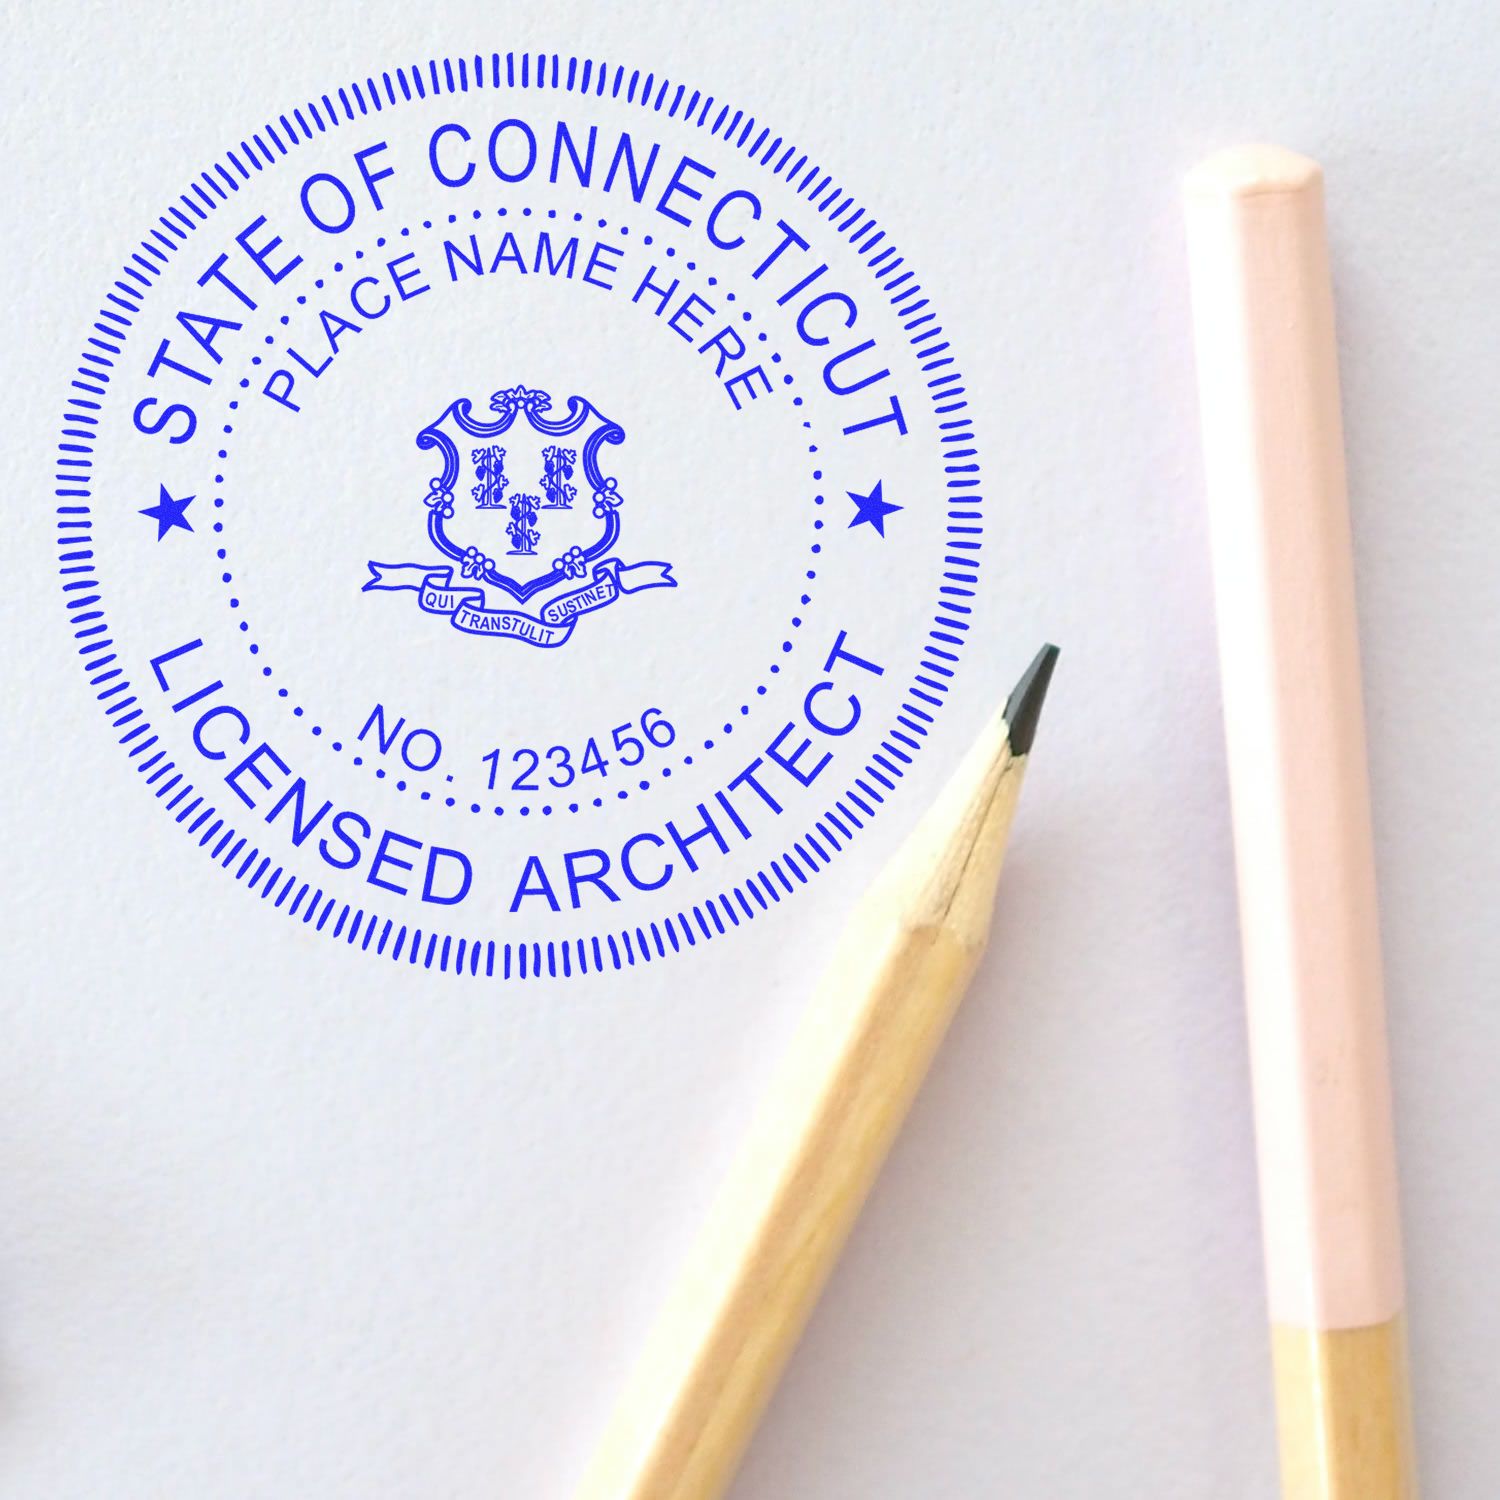 Mastering your Architectural Stamp: Connecticuts Laws and Requirements feature Image